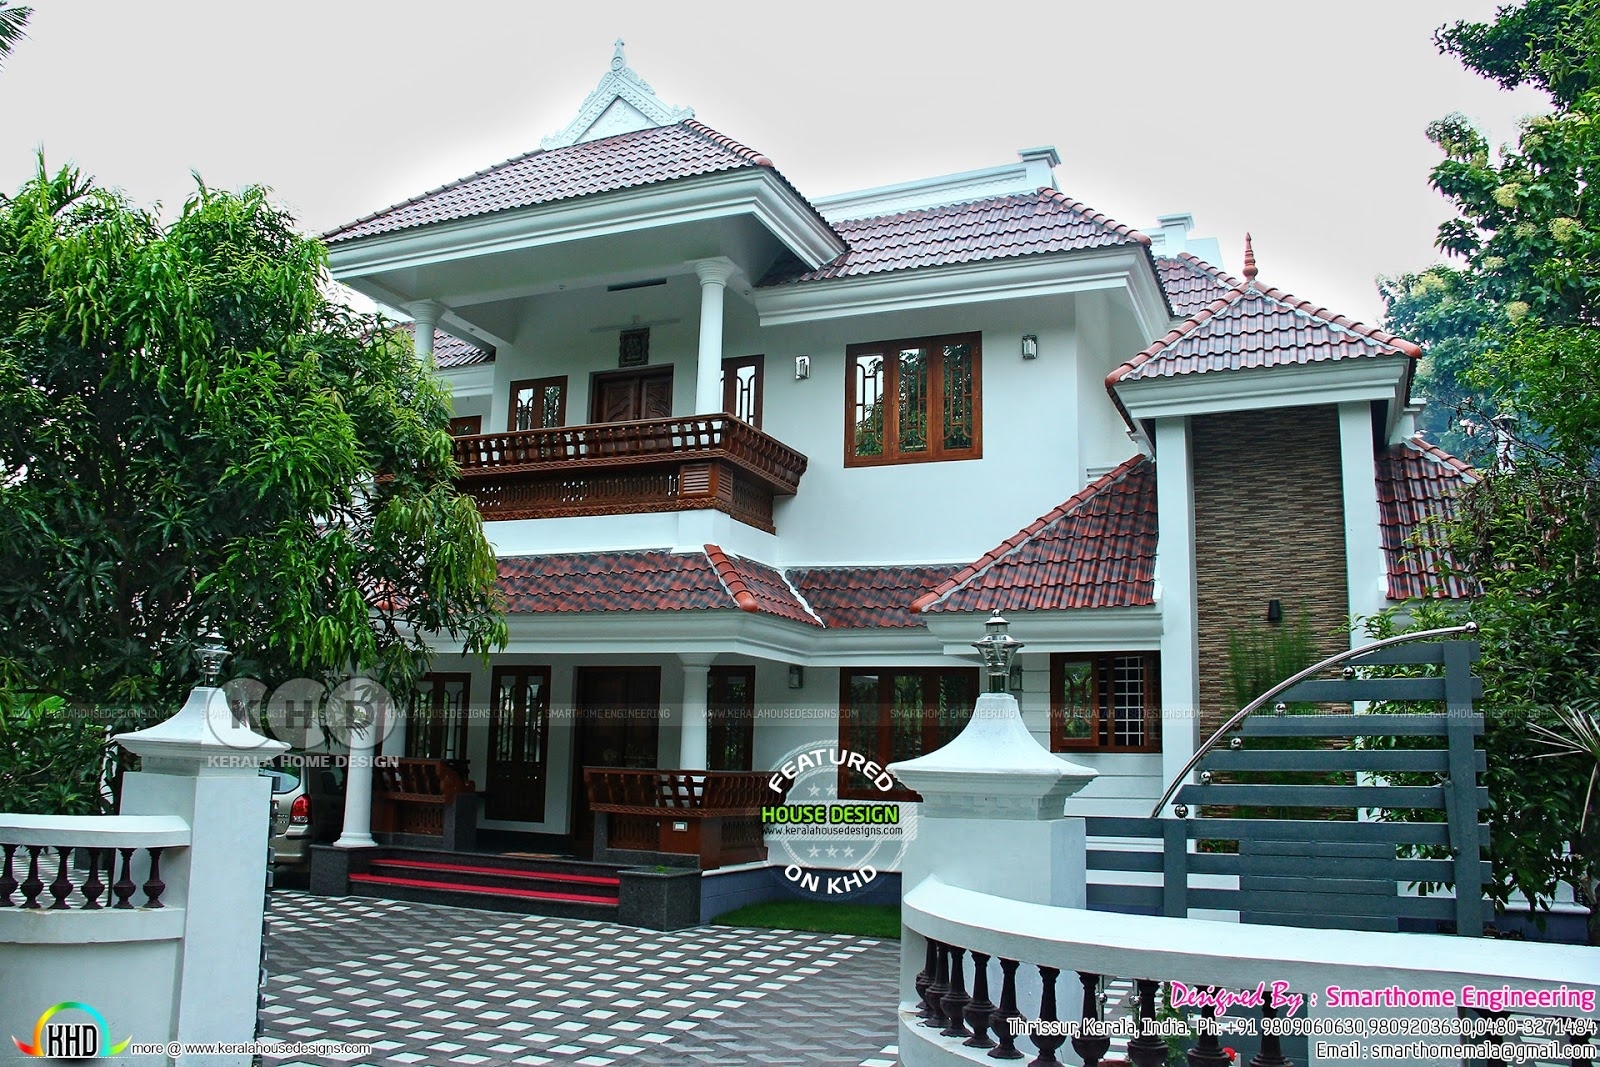 Fantastic 2810 sq ft finished kerala home plan kerala home design and floor plans with marvelous kerala house plans